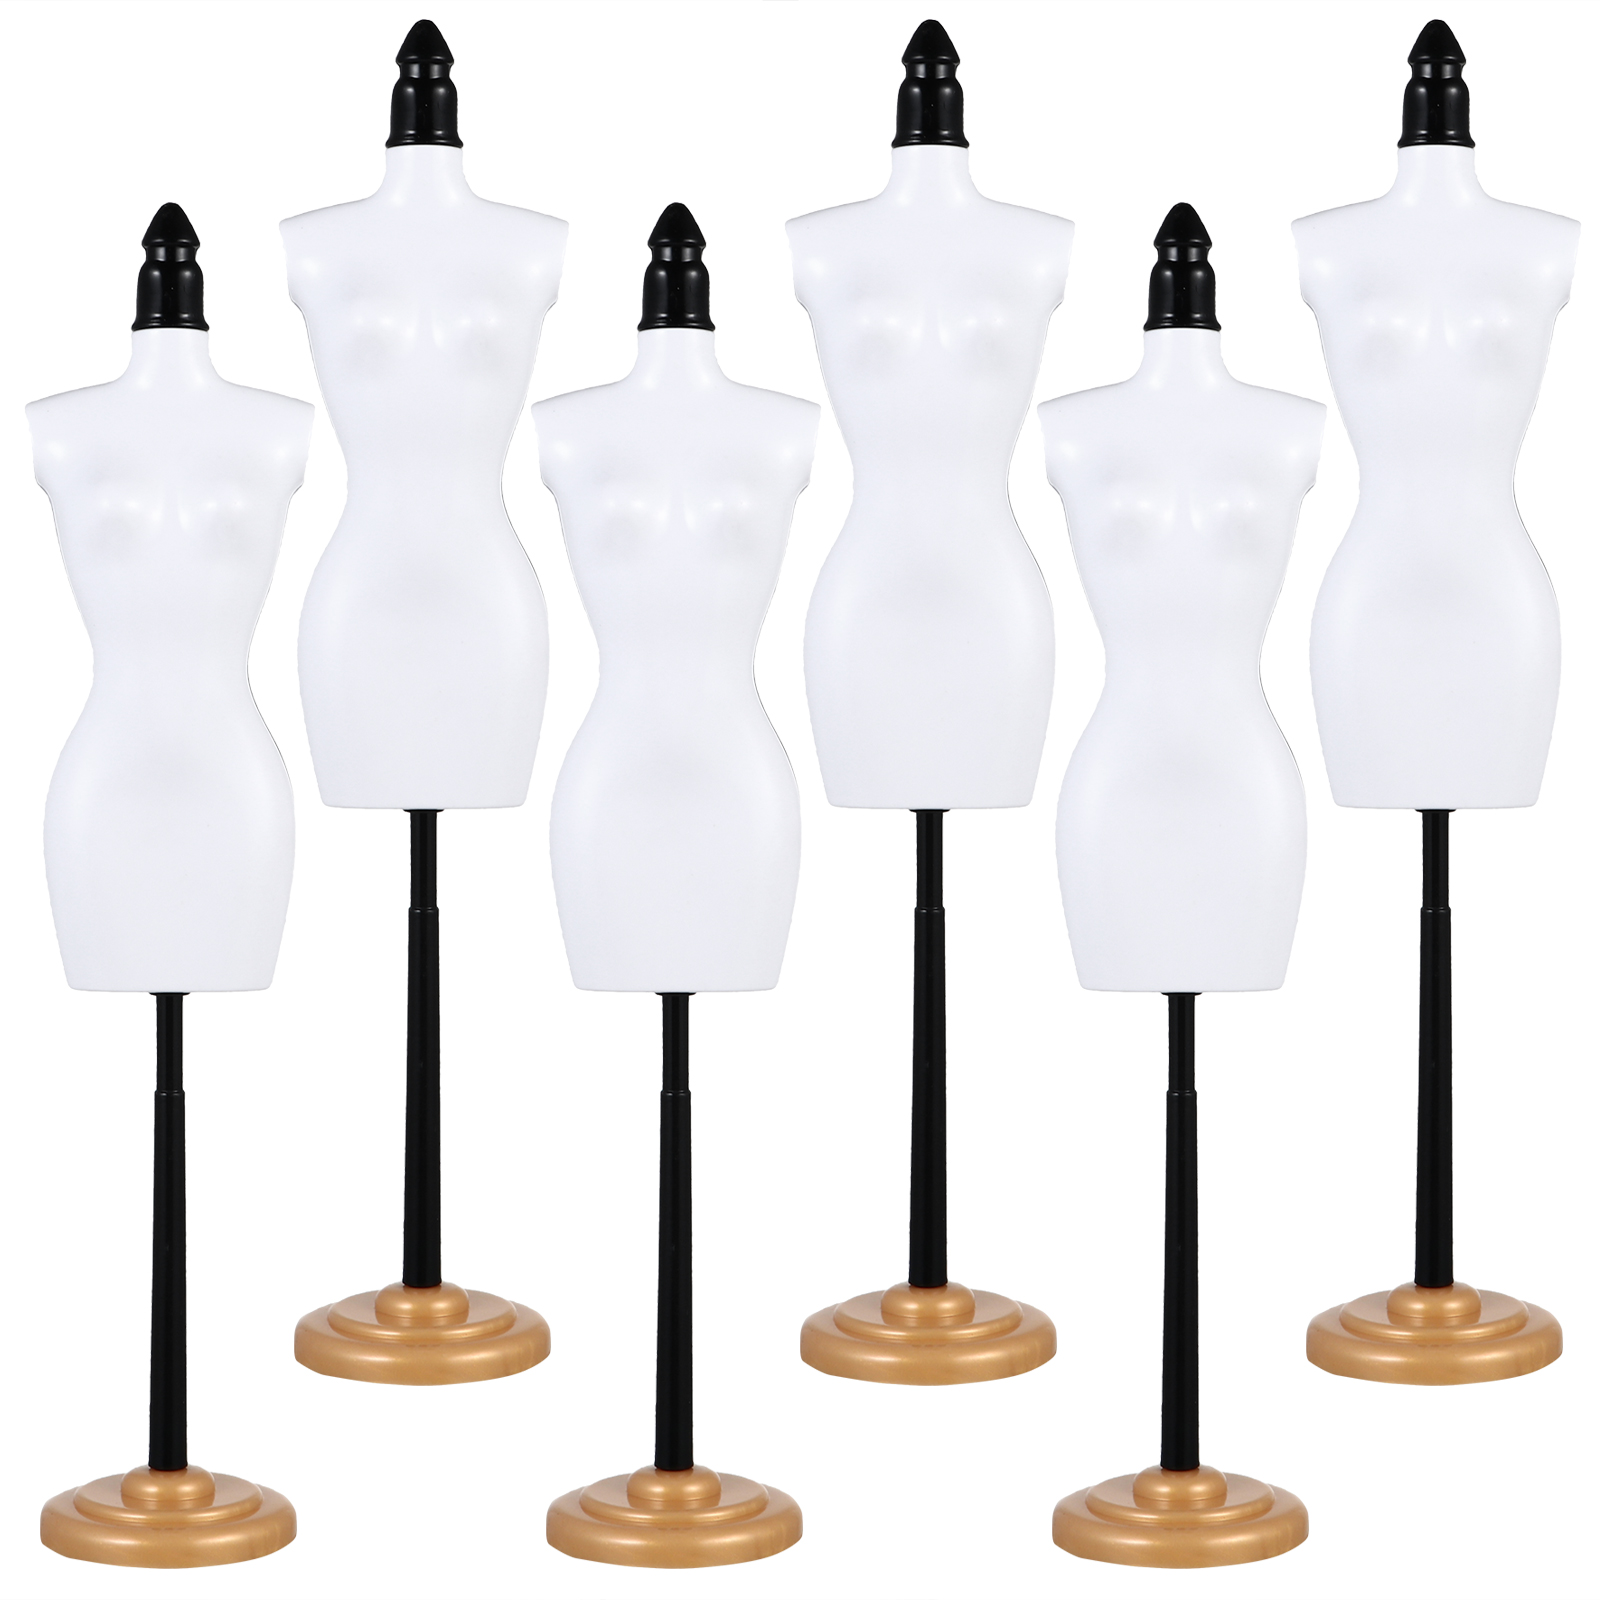 Doll Clothes Holder Dress Mannequin Display Form Mini Model Stand